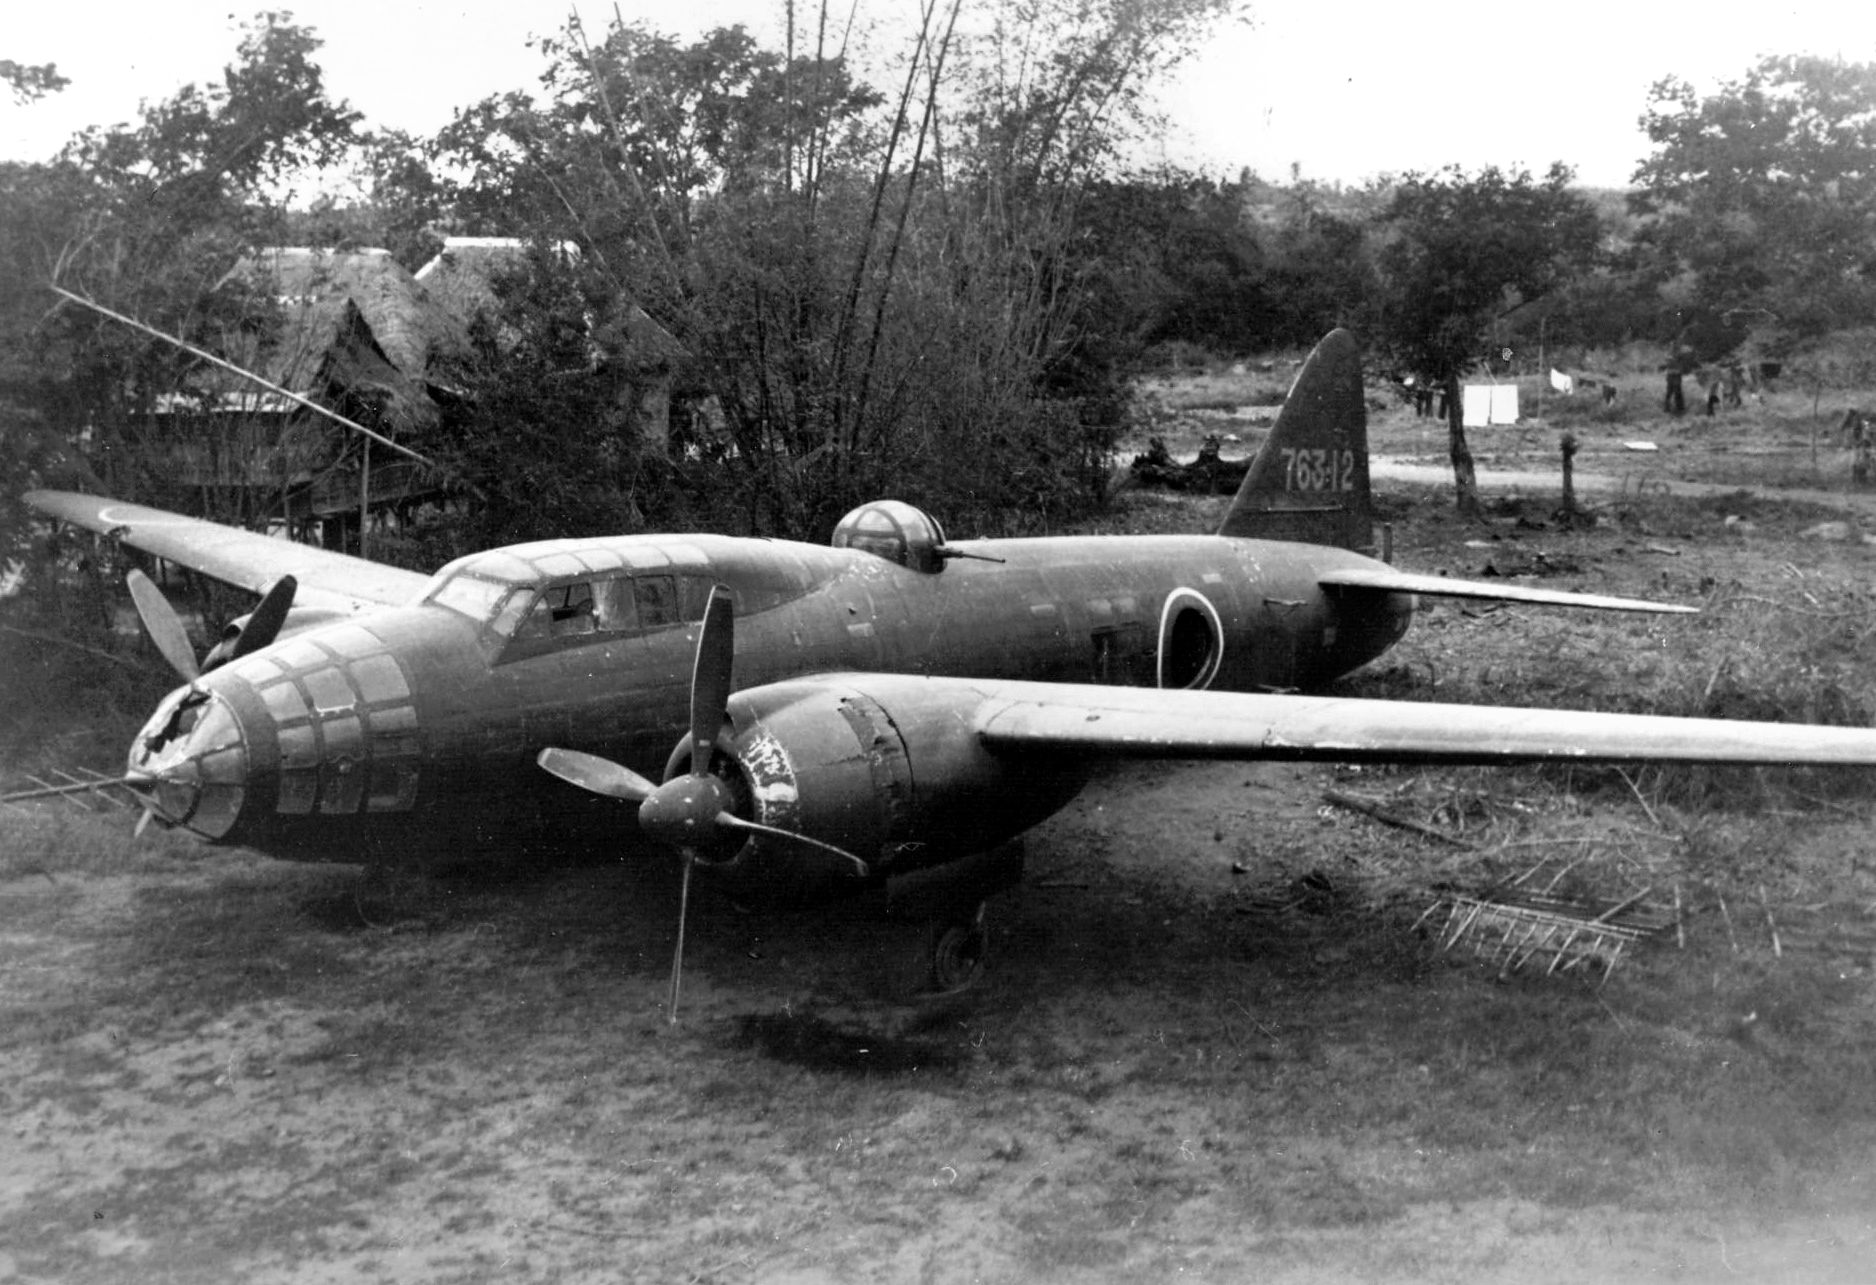 The night fighter pilots of VMFN-531 scored their first aerial victory against the Japanese in downing a Mitsubishi G4M bomber like this one, known to the Allies by the code name “Betty.”